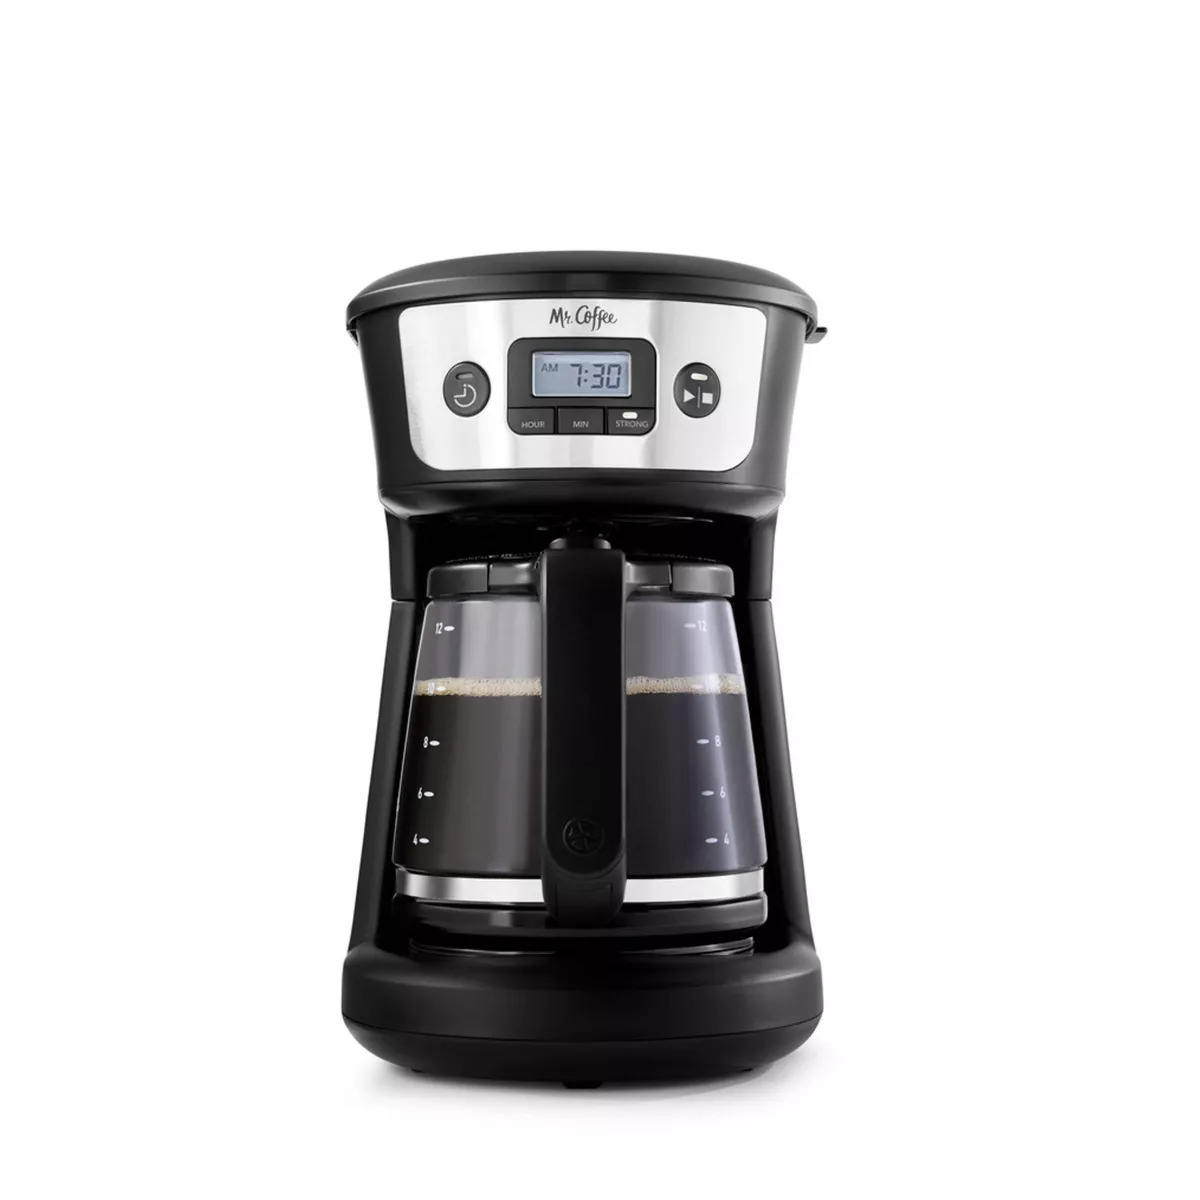 Mr. Coffee 12-Cup Programmable Coffee Maker - Black/Stainless Steel Coffee Maker